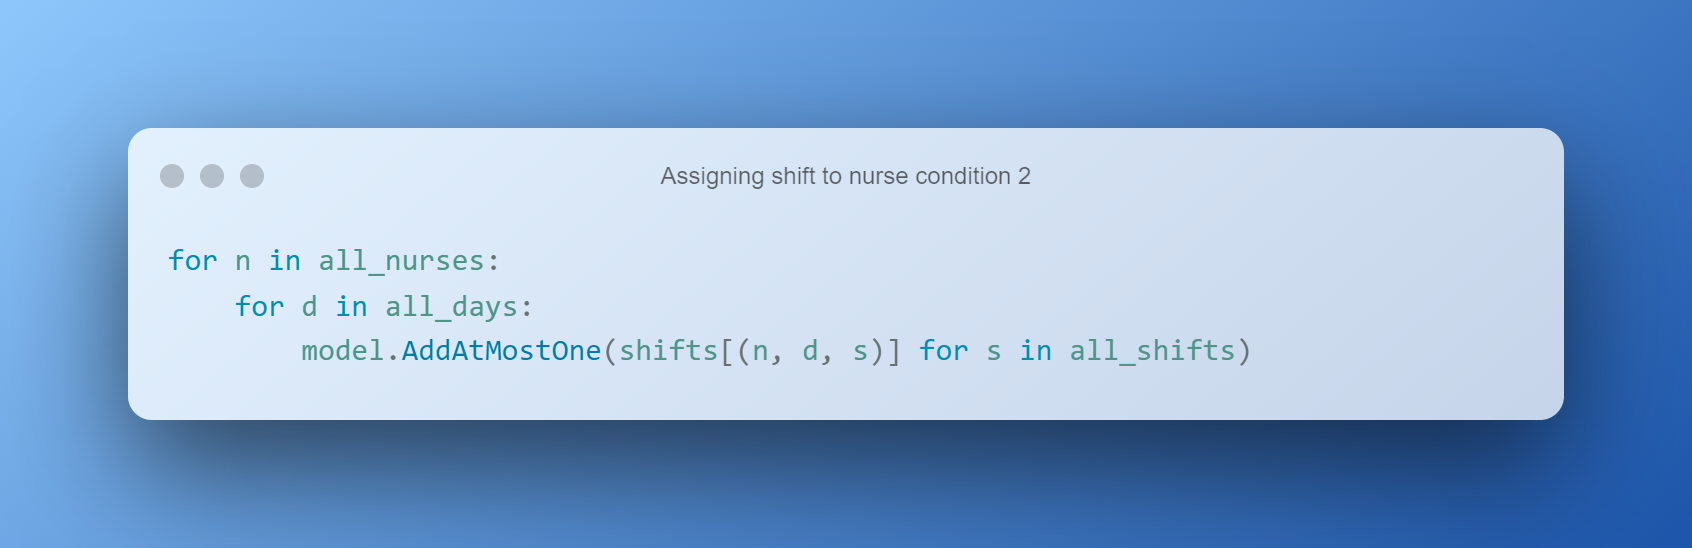 Assigning Shift To Nurse Condition 2